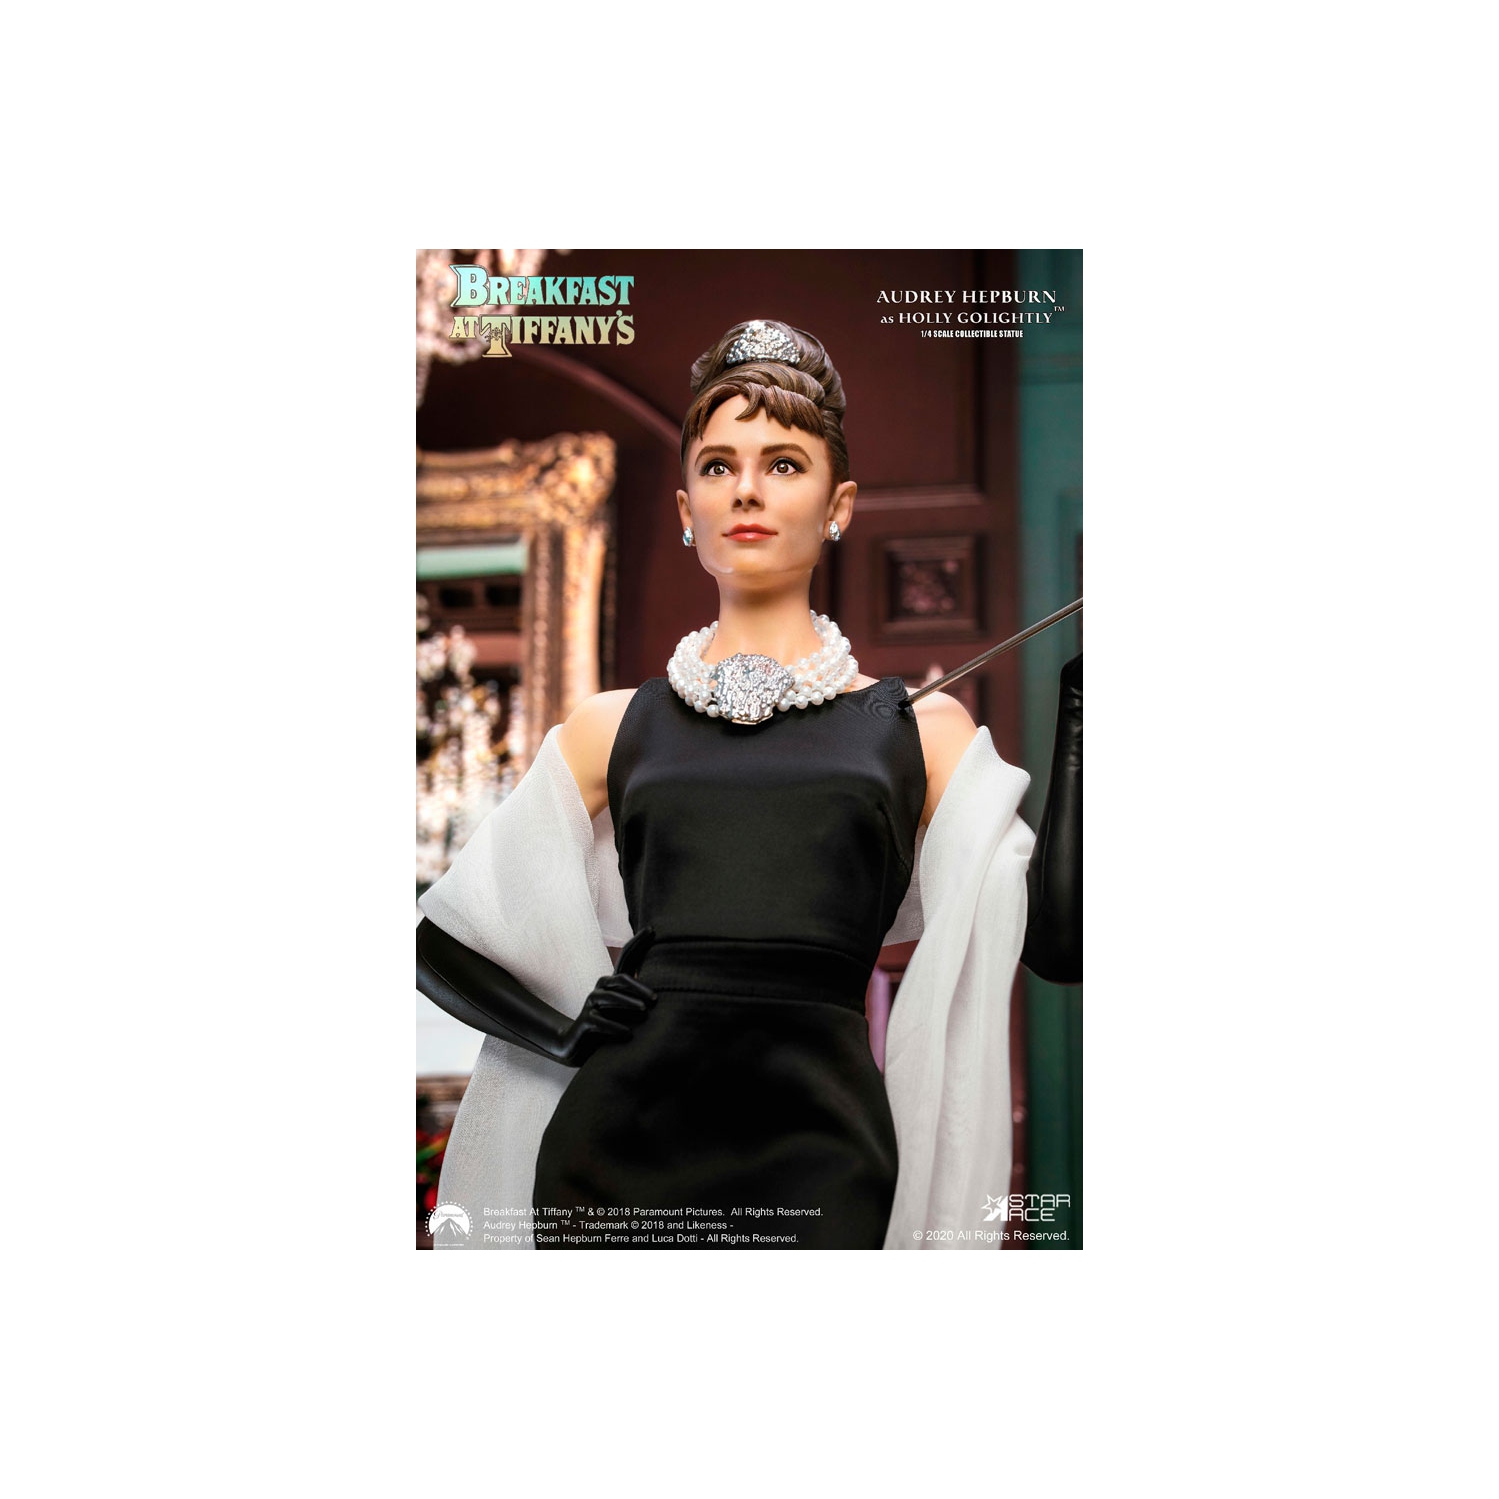 Holly Golightly (Audrey Hepburn) Breakfast at Tiffany's Quarter Movie (1/4) Scale Statue #/500